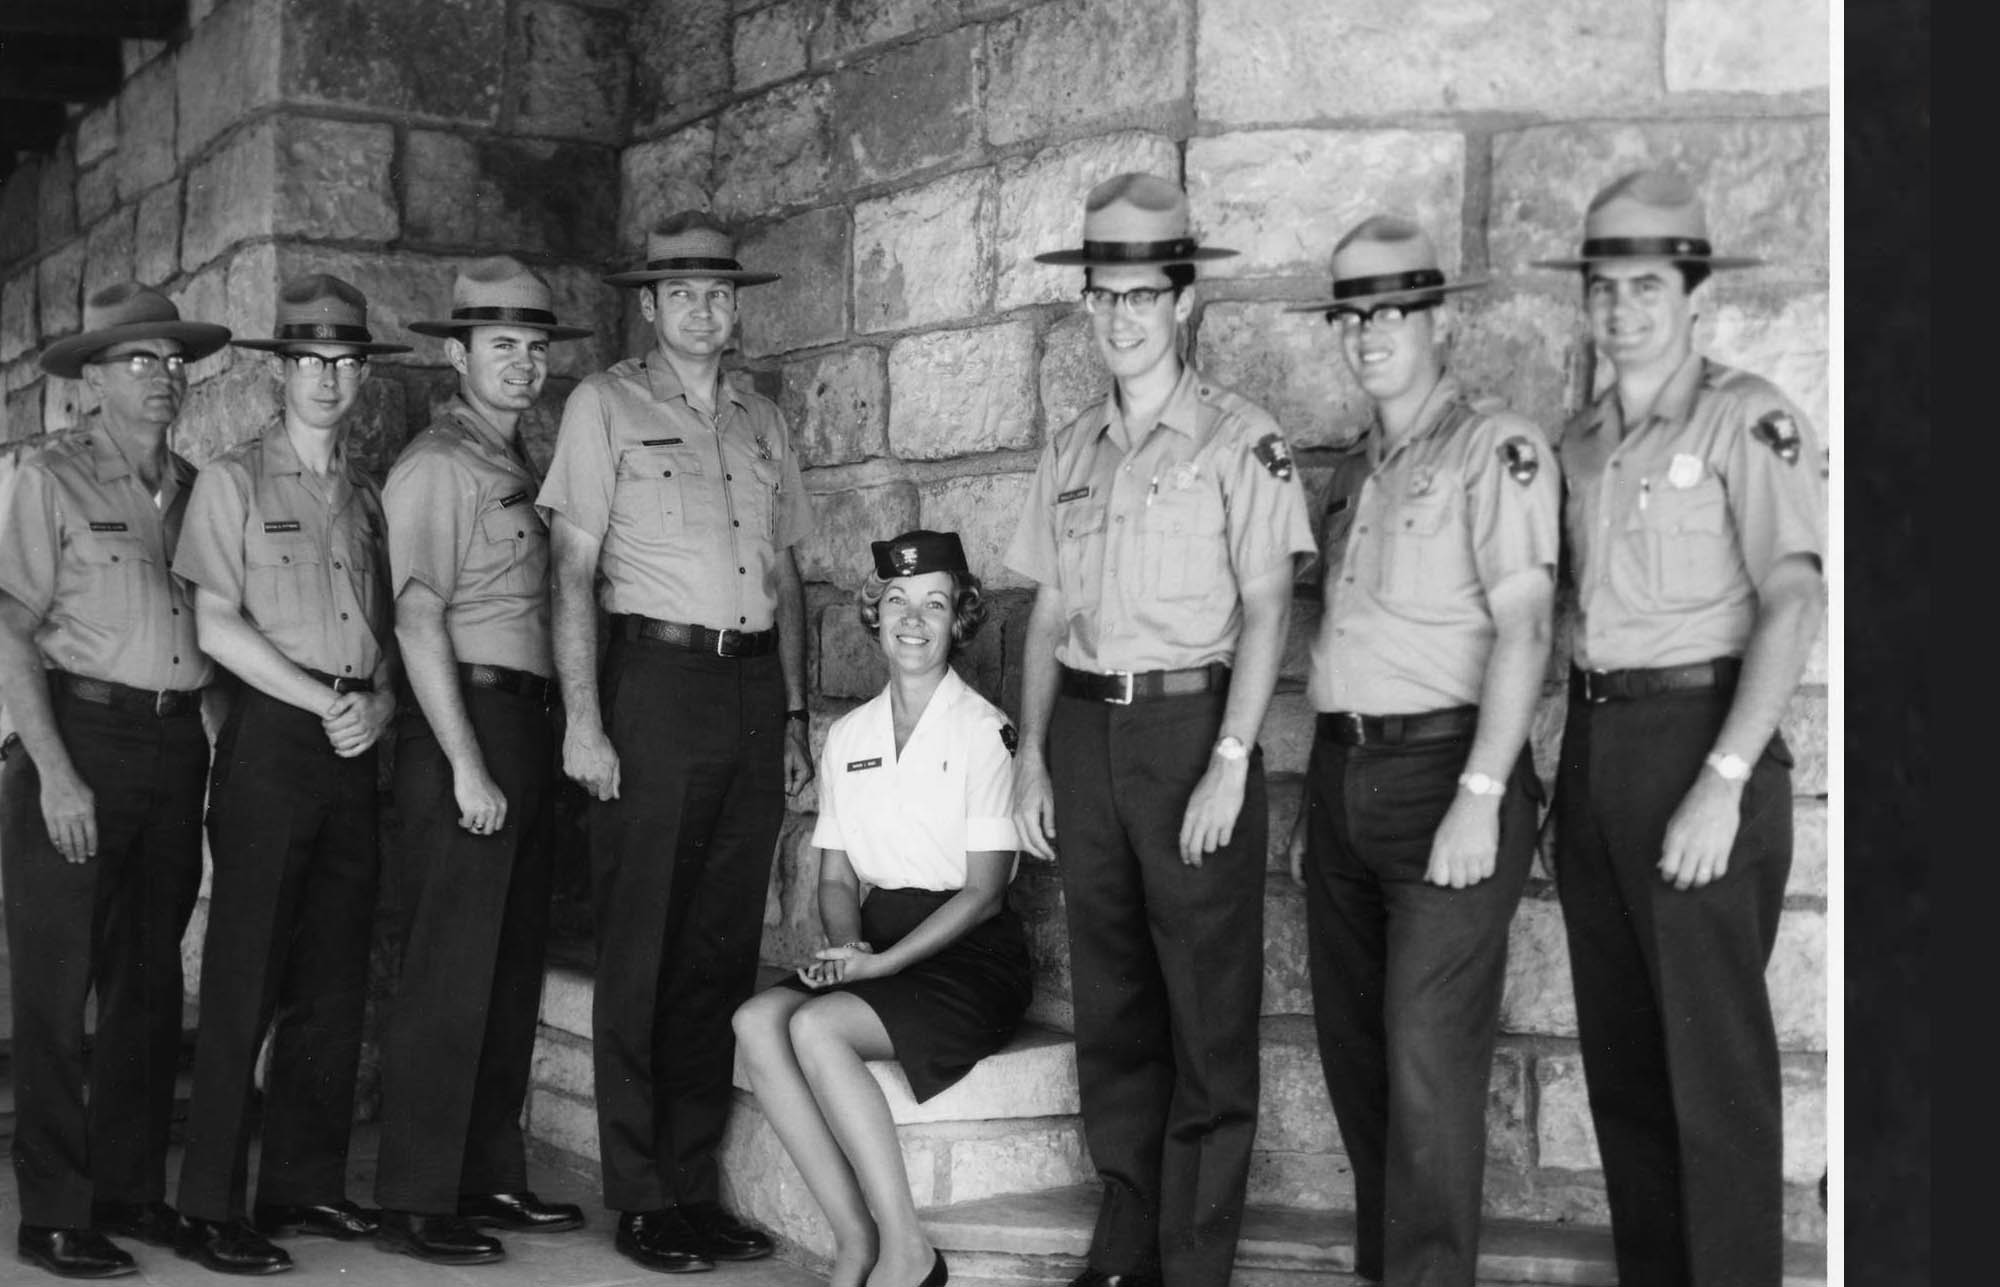 Marion Riggs in NPS uniform skirt, blouse, small arrowhead pin, and pillbox hat sits between seven men standing in uniforms with shield-shaped badges.